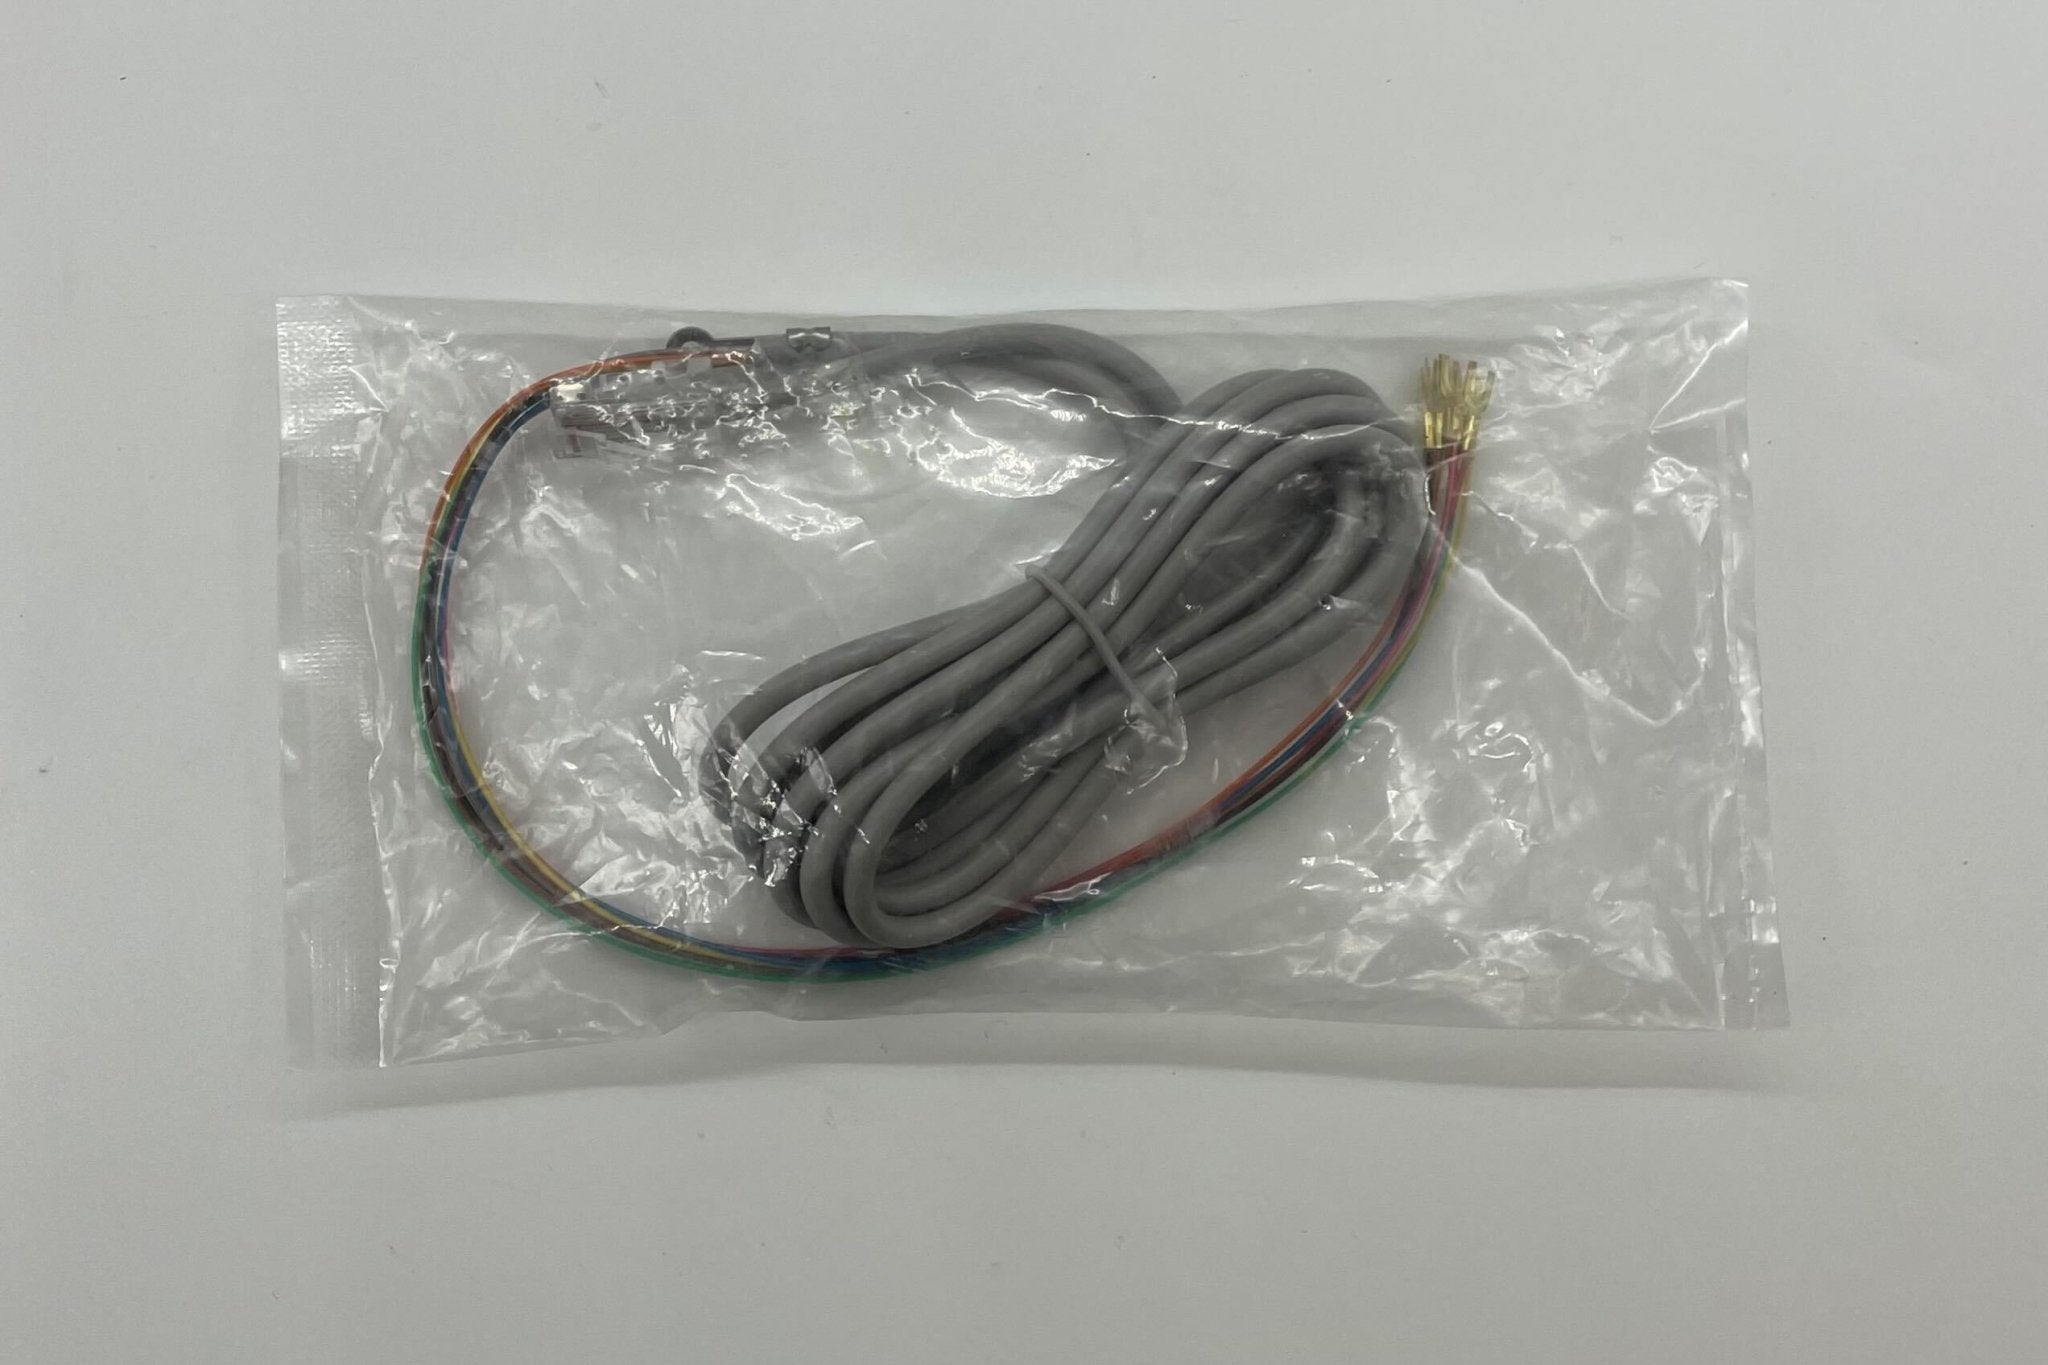 Firelite 7860 Telephone Connecting Cord for RJ31X Jack - The Fire Alarm Supplier